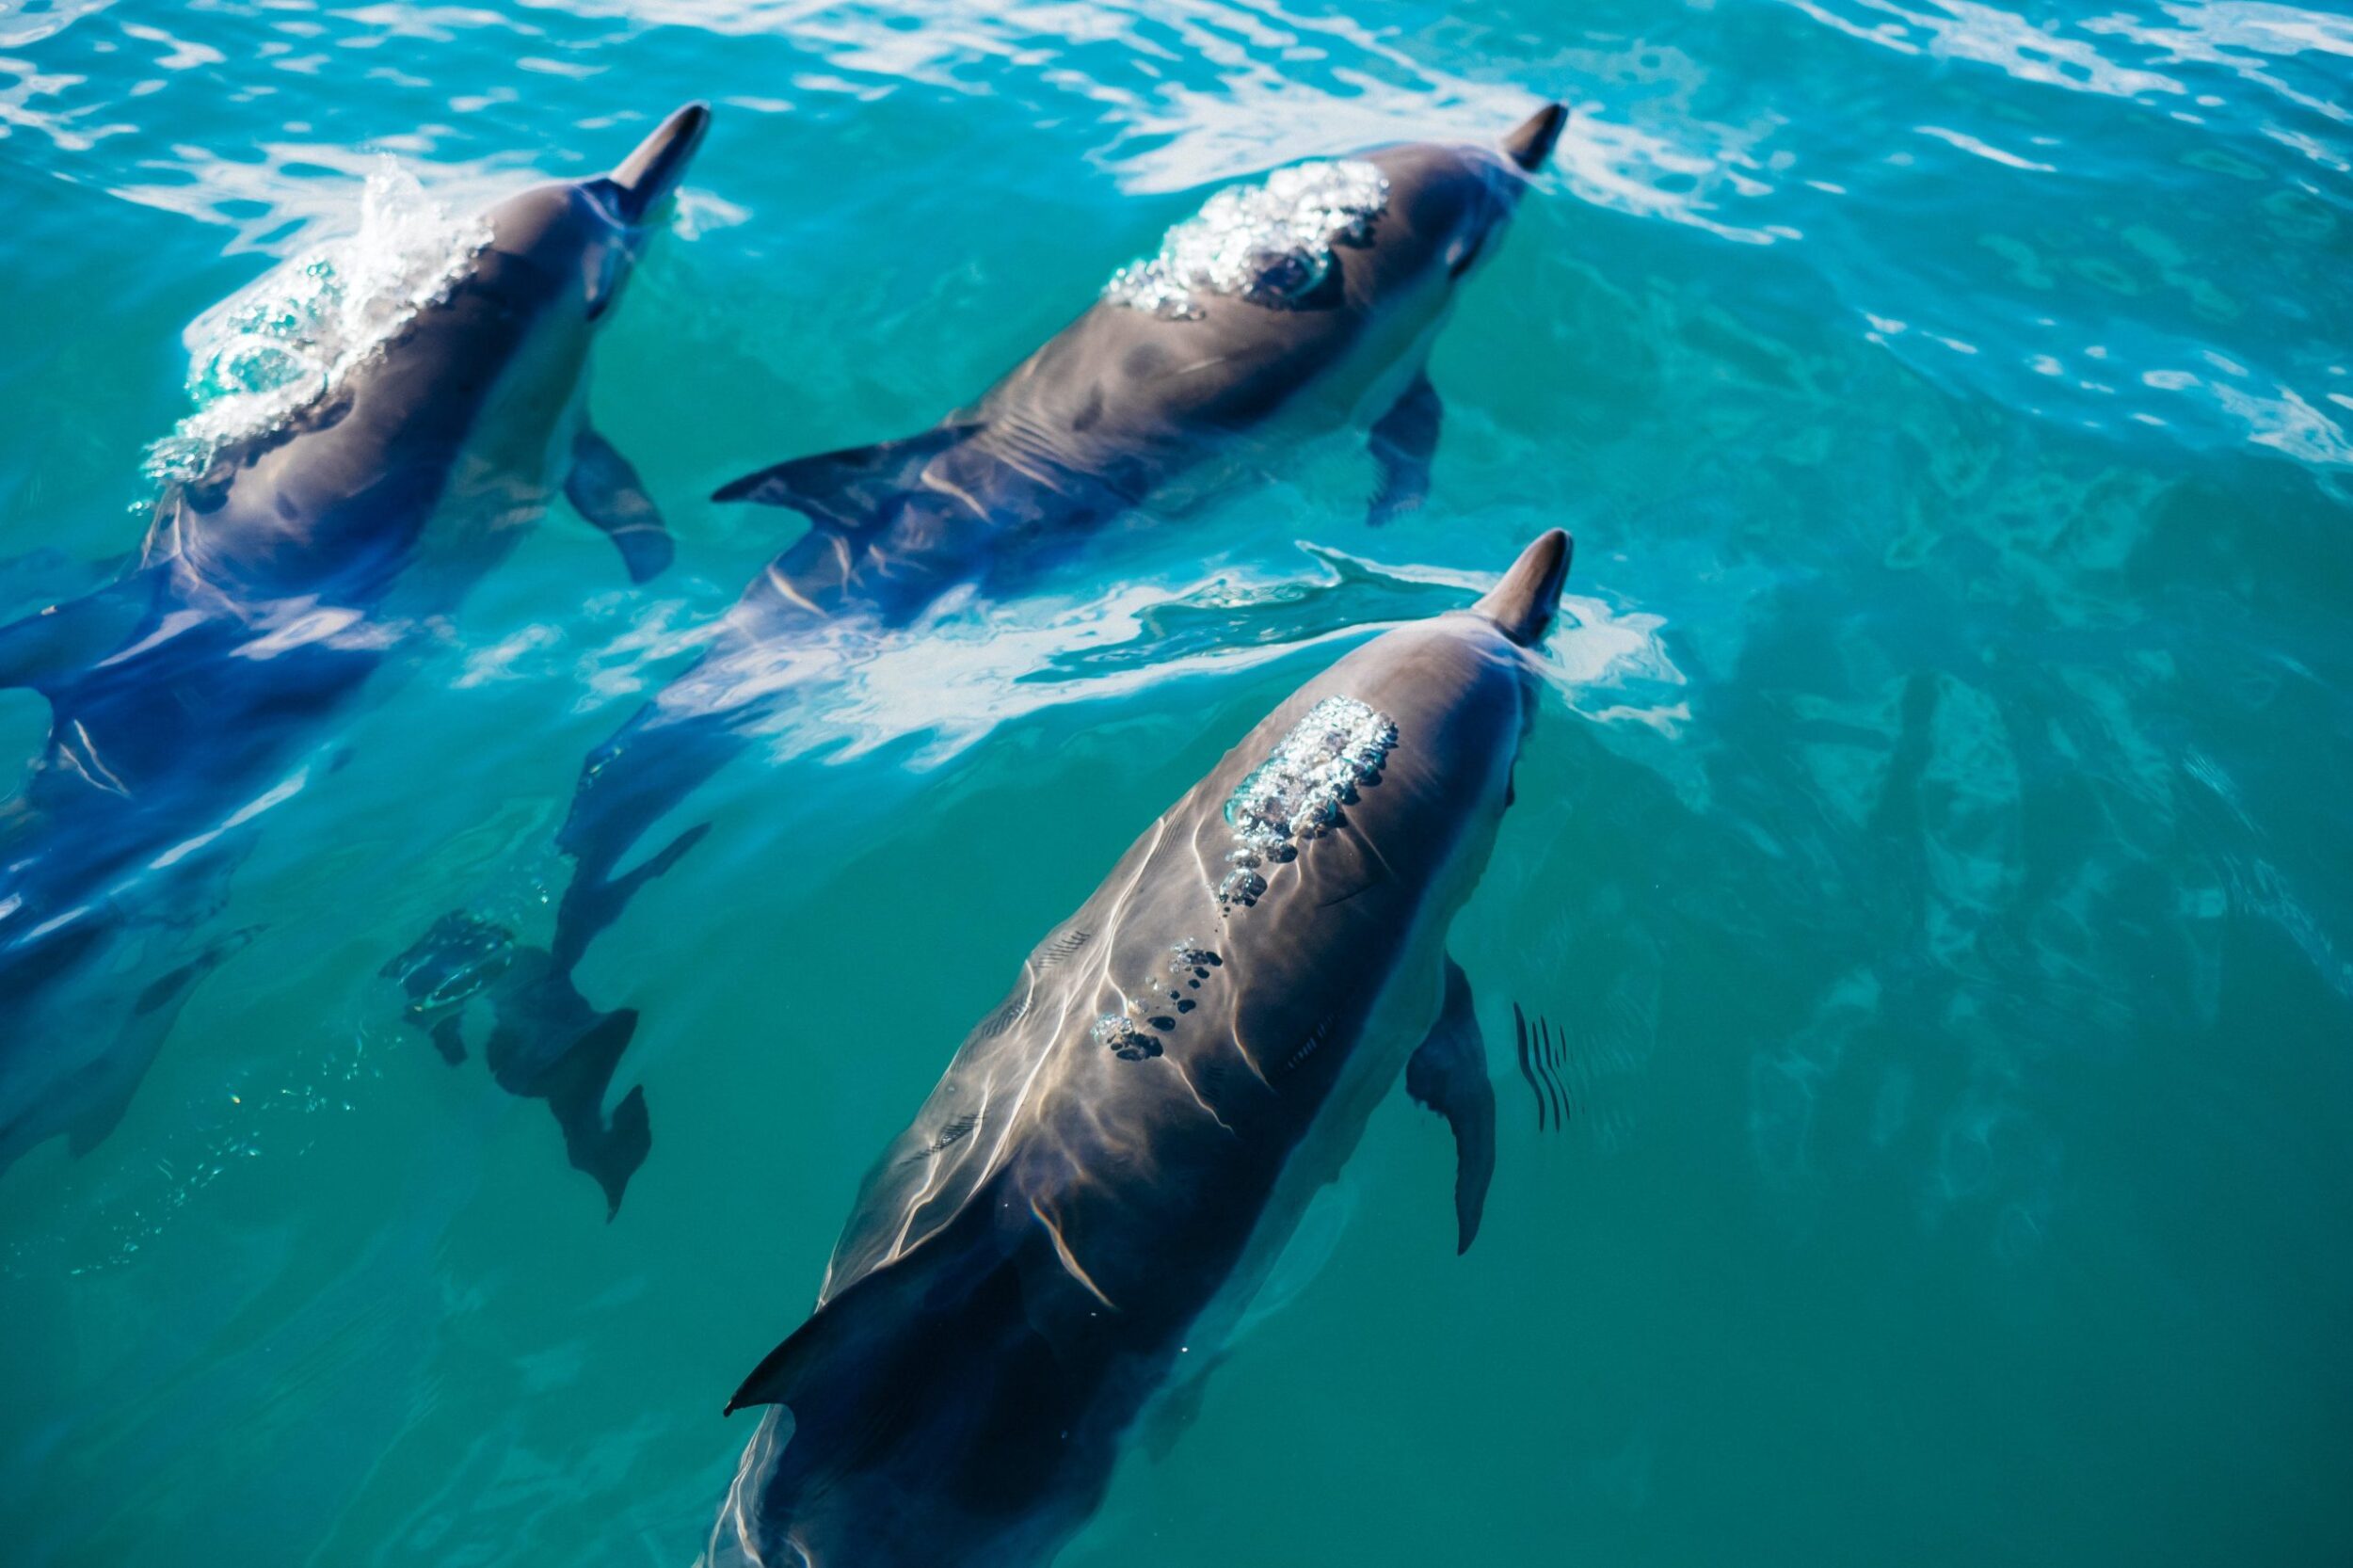 THree dolphins swimming in blue water at Kaikoura